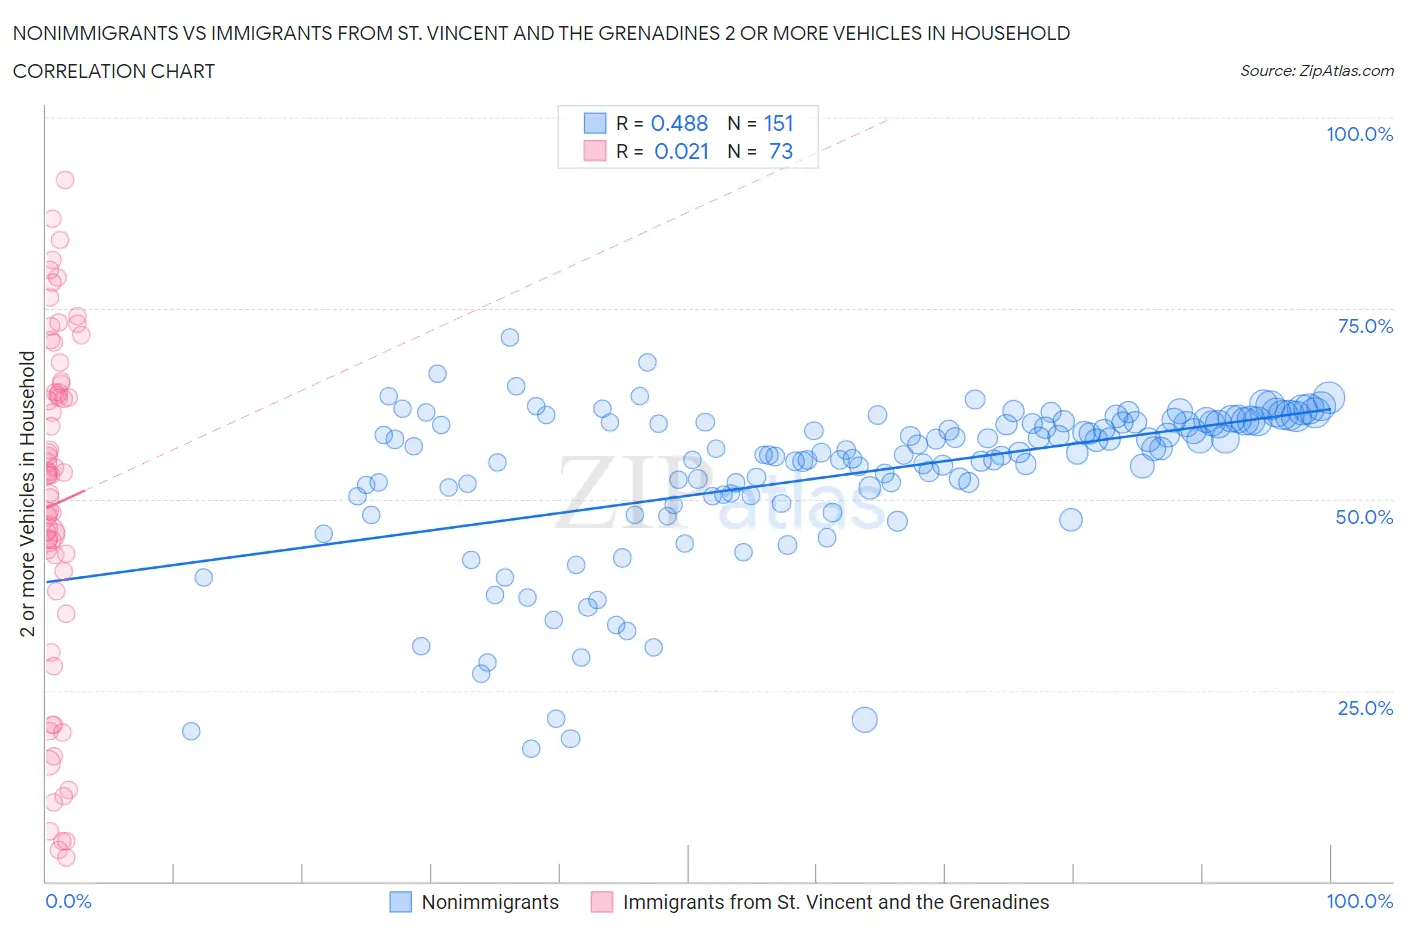 Nonimmigrants vs Immigrants from St. Vincent and the Grenadines 2 or more Vehicles in Household